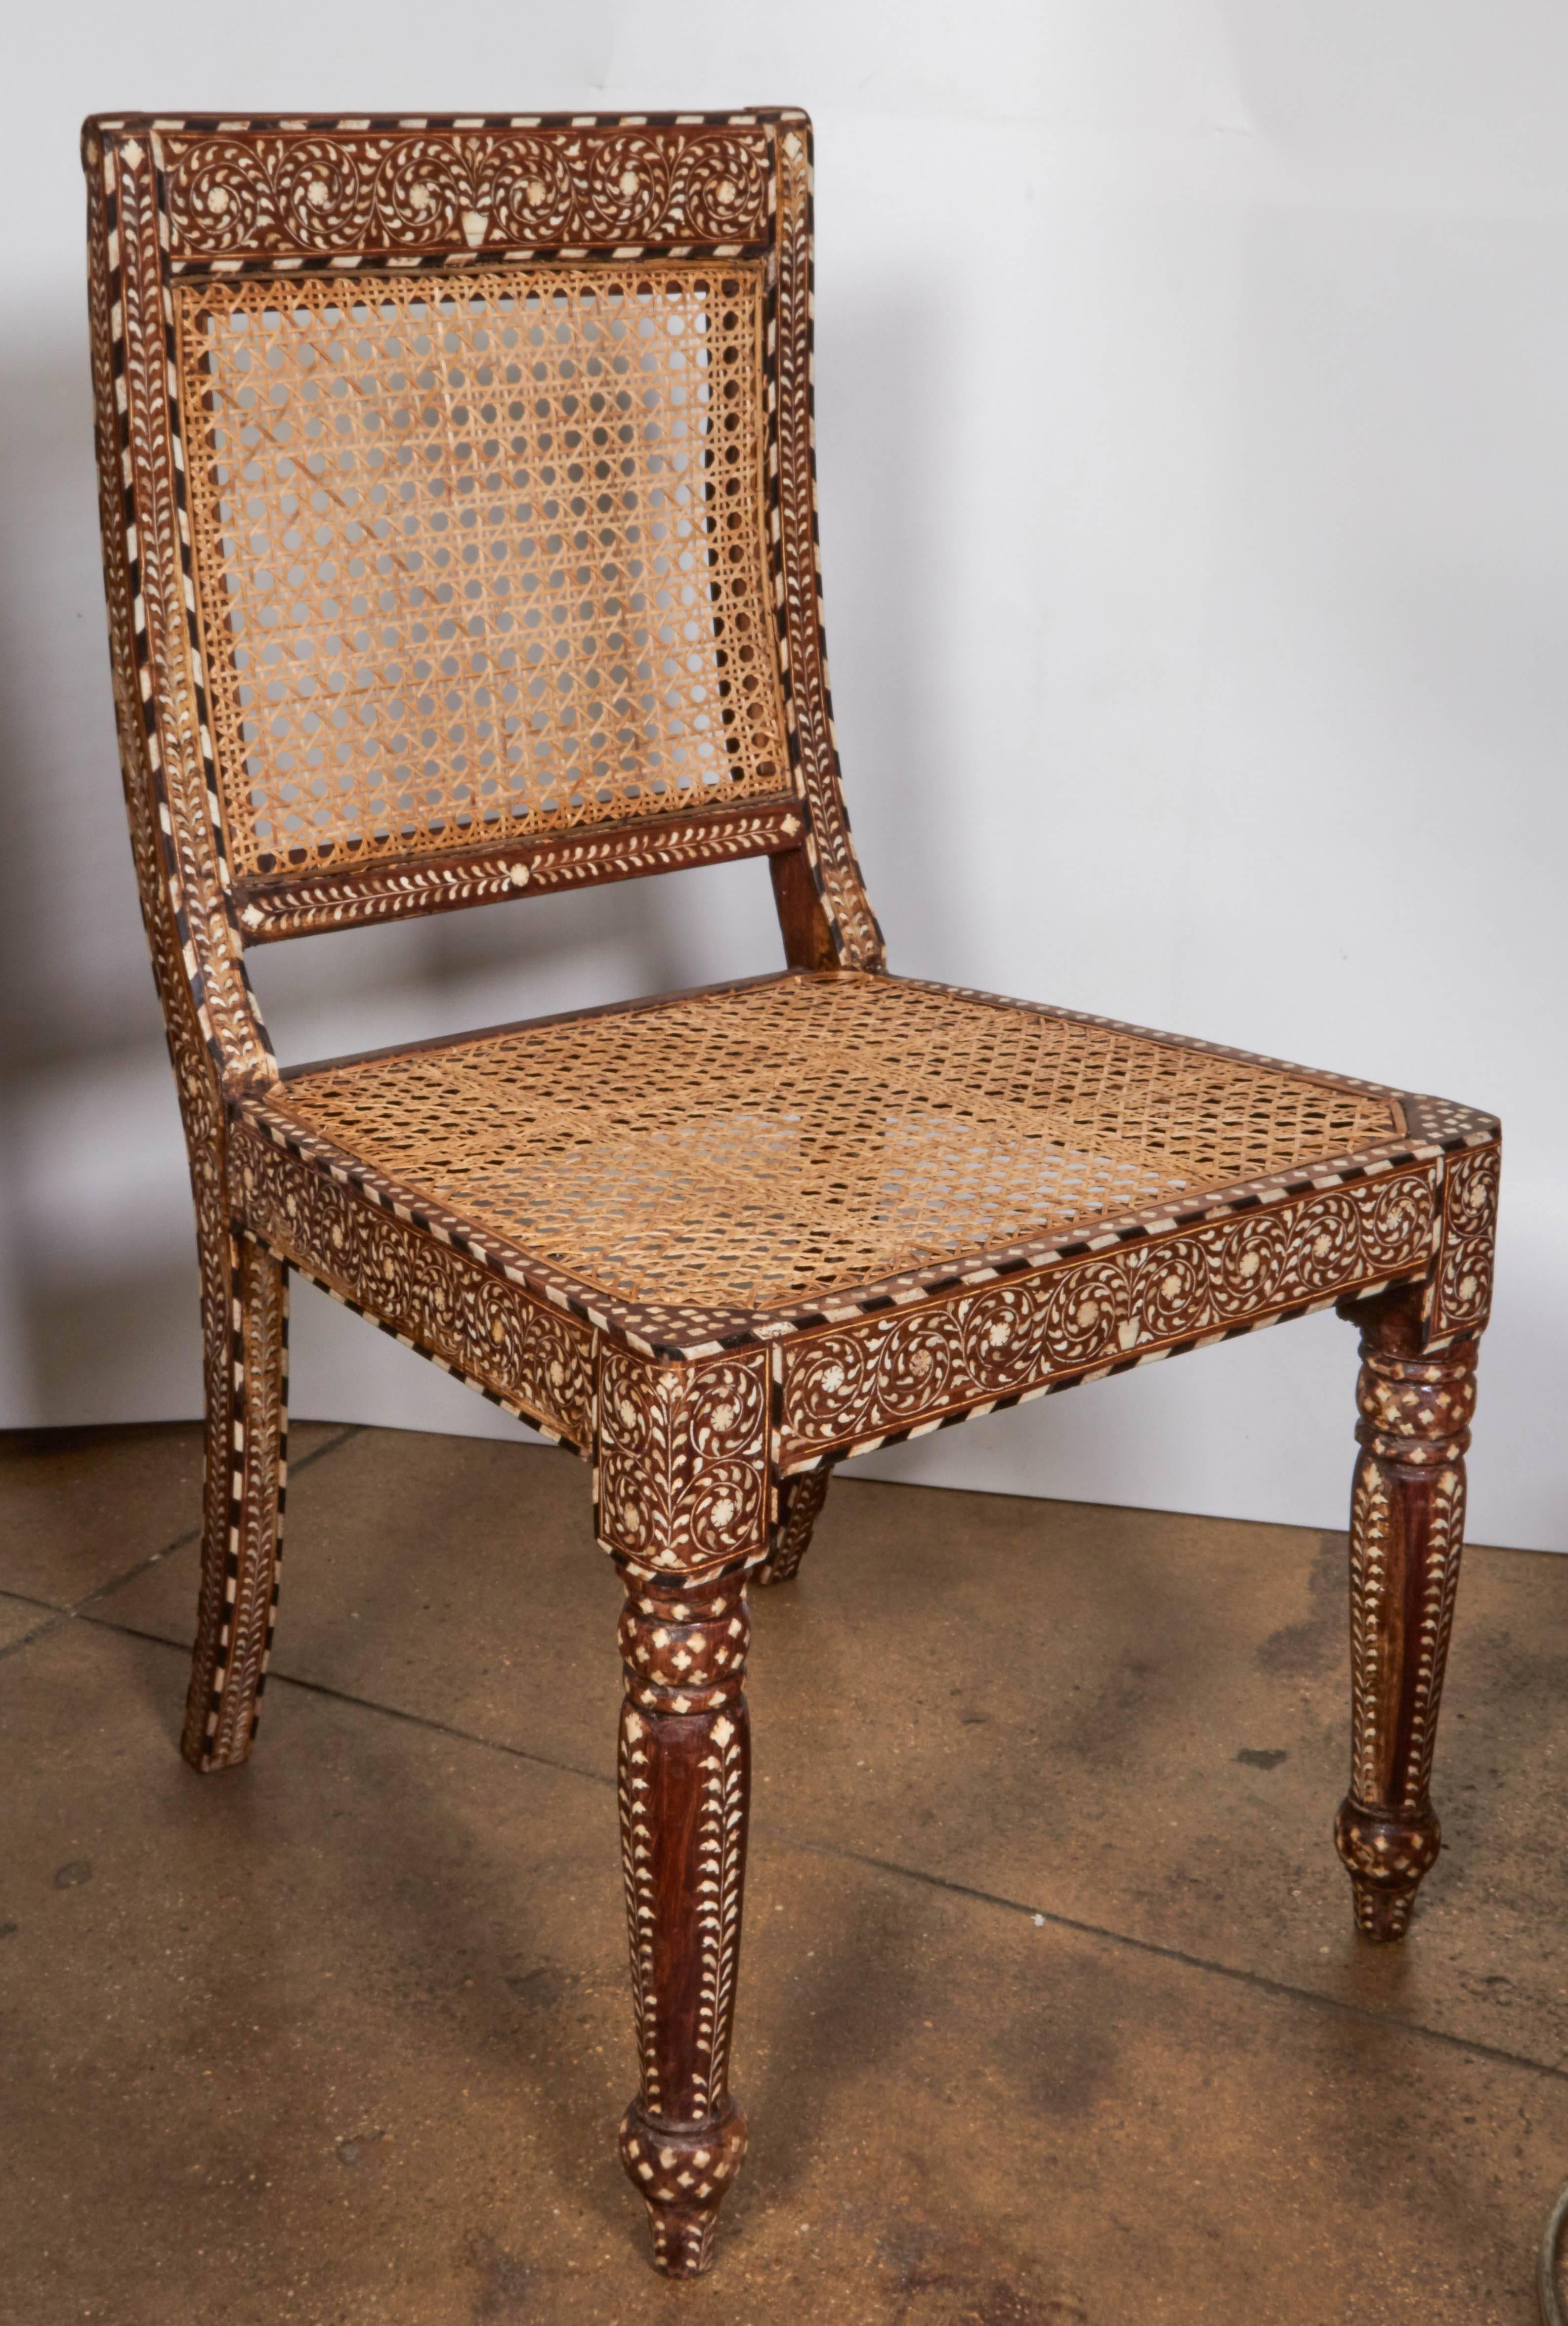 Indian Armless Bone Inlaid Chair From India, late 20th Century